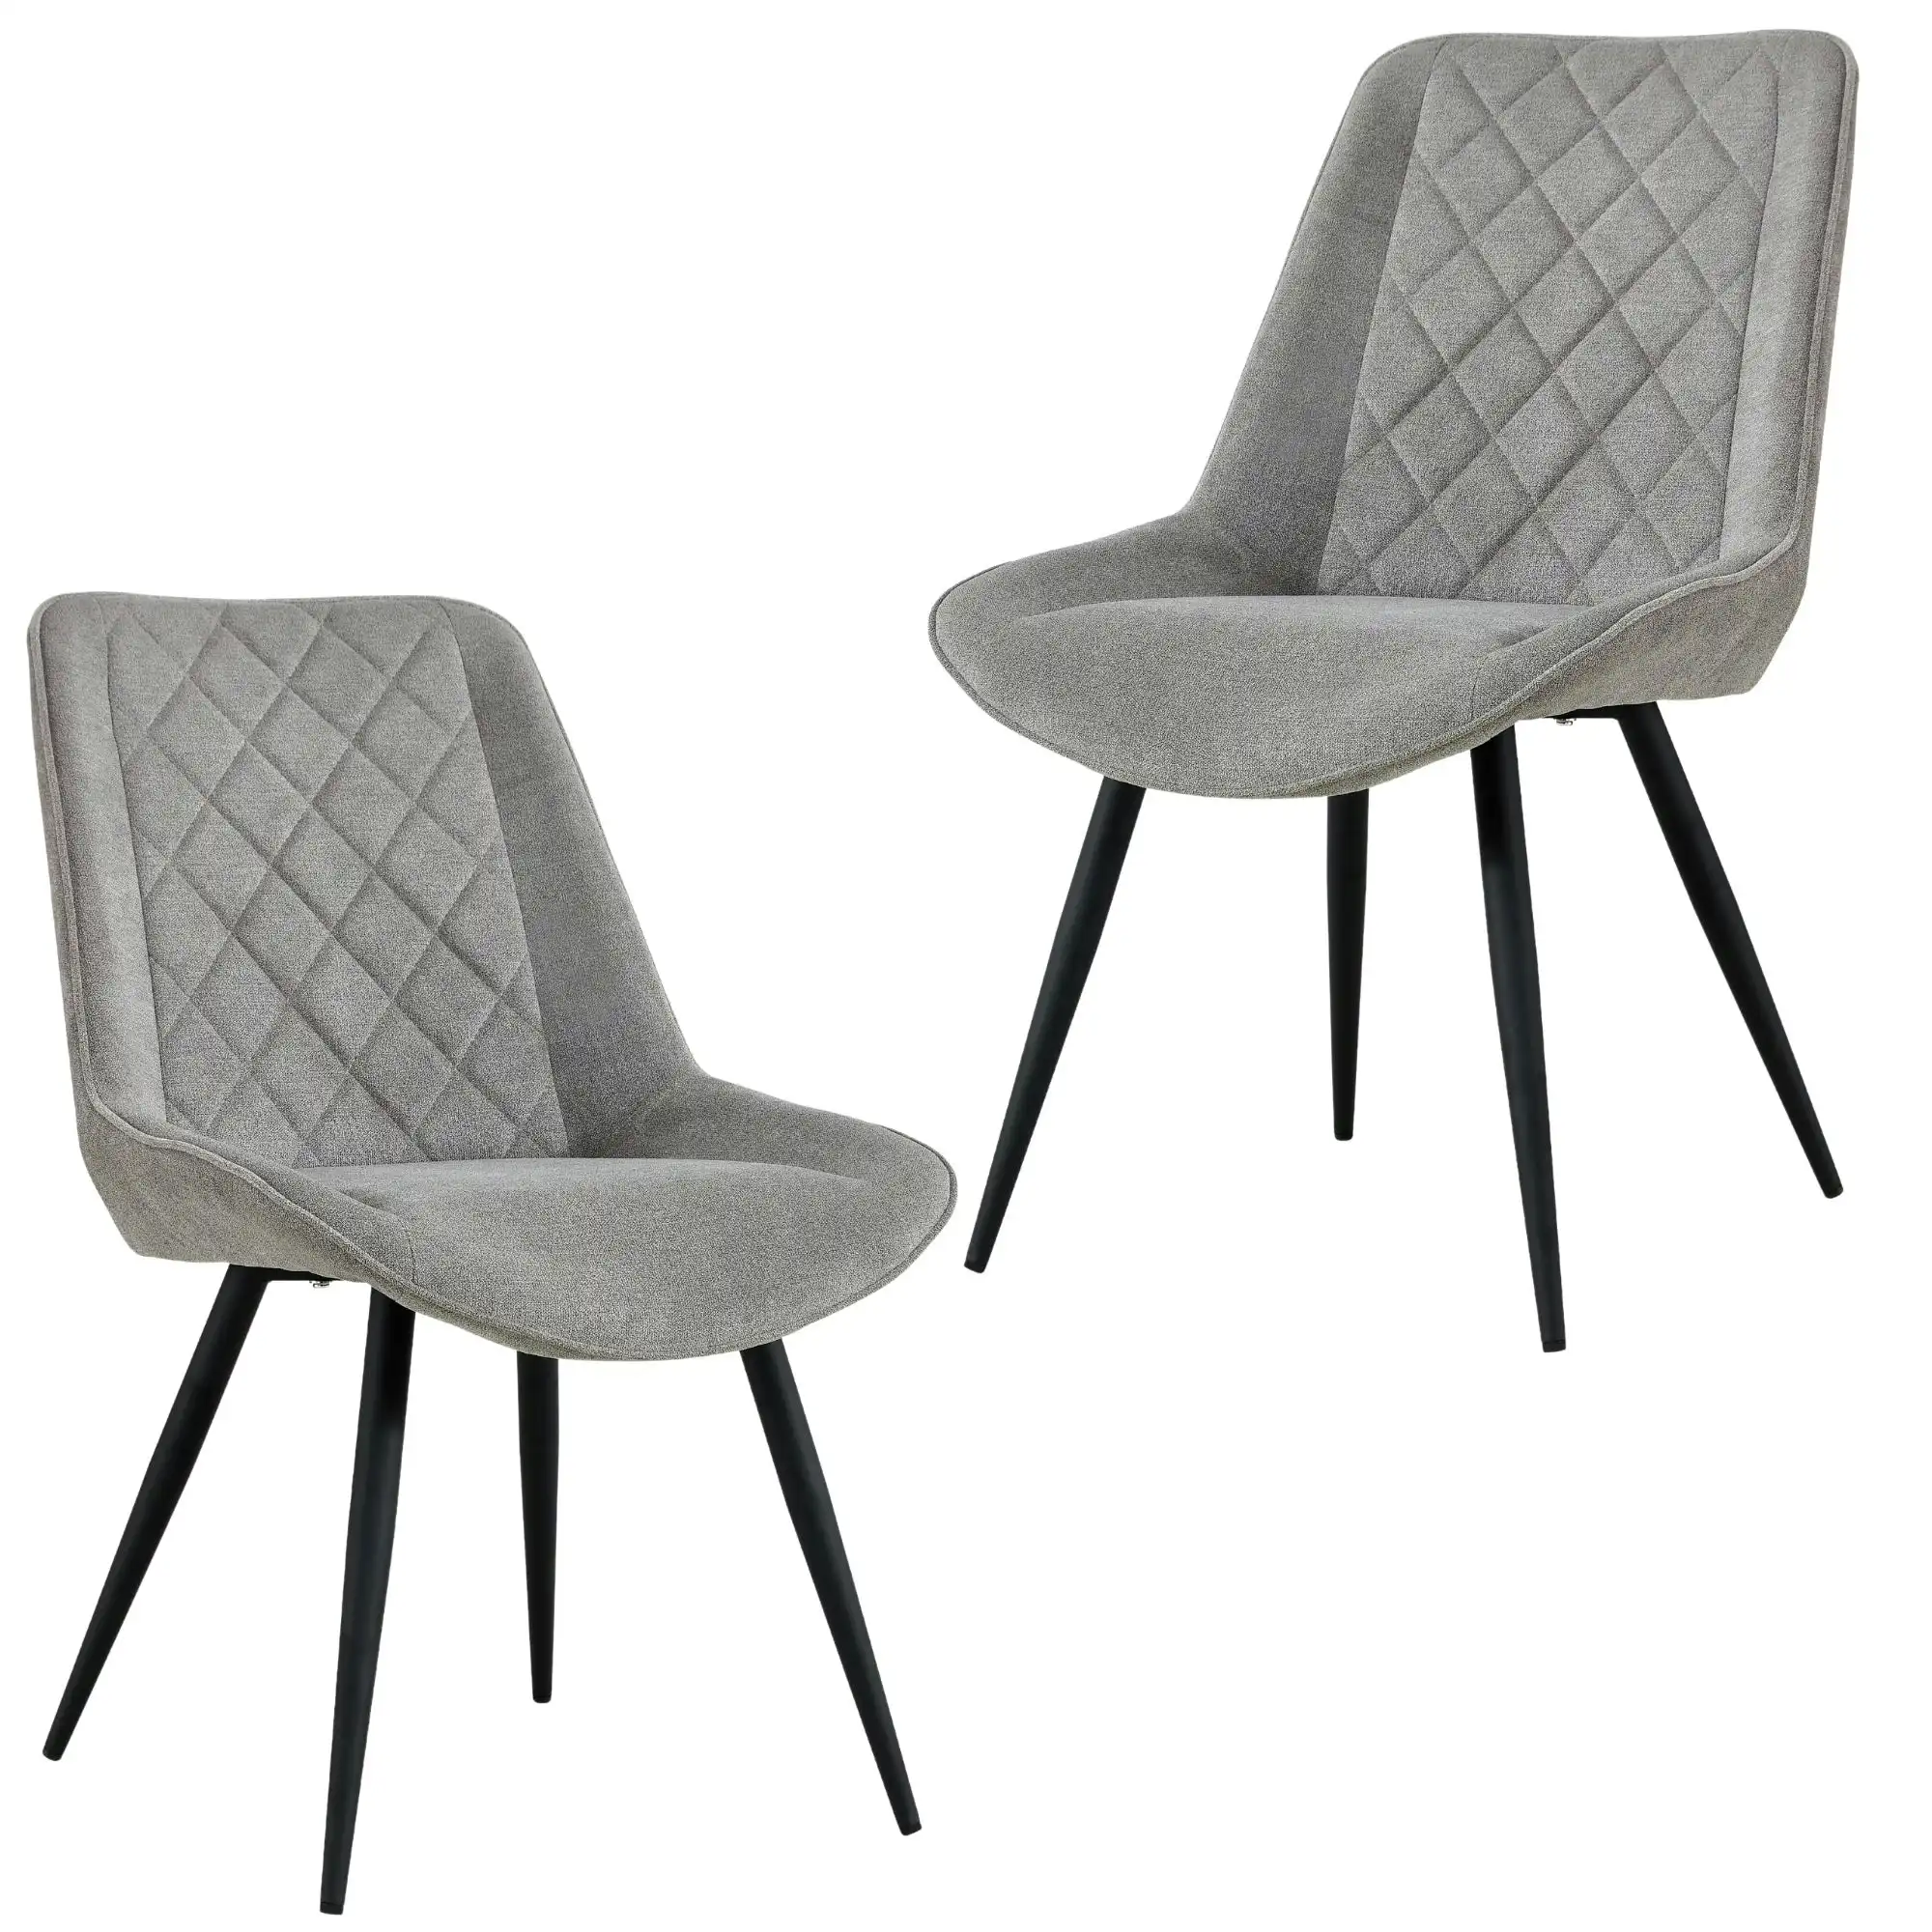 Helenium Set of 2 Dining Chair